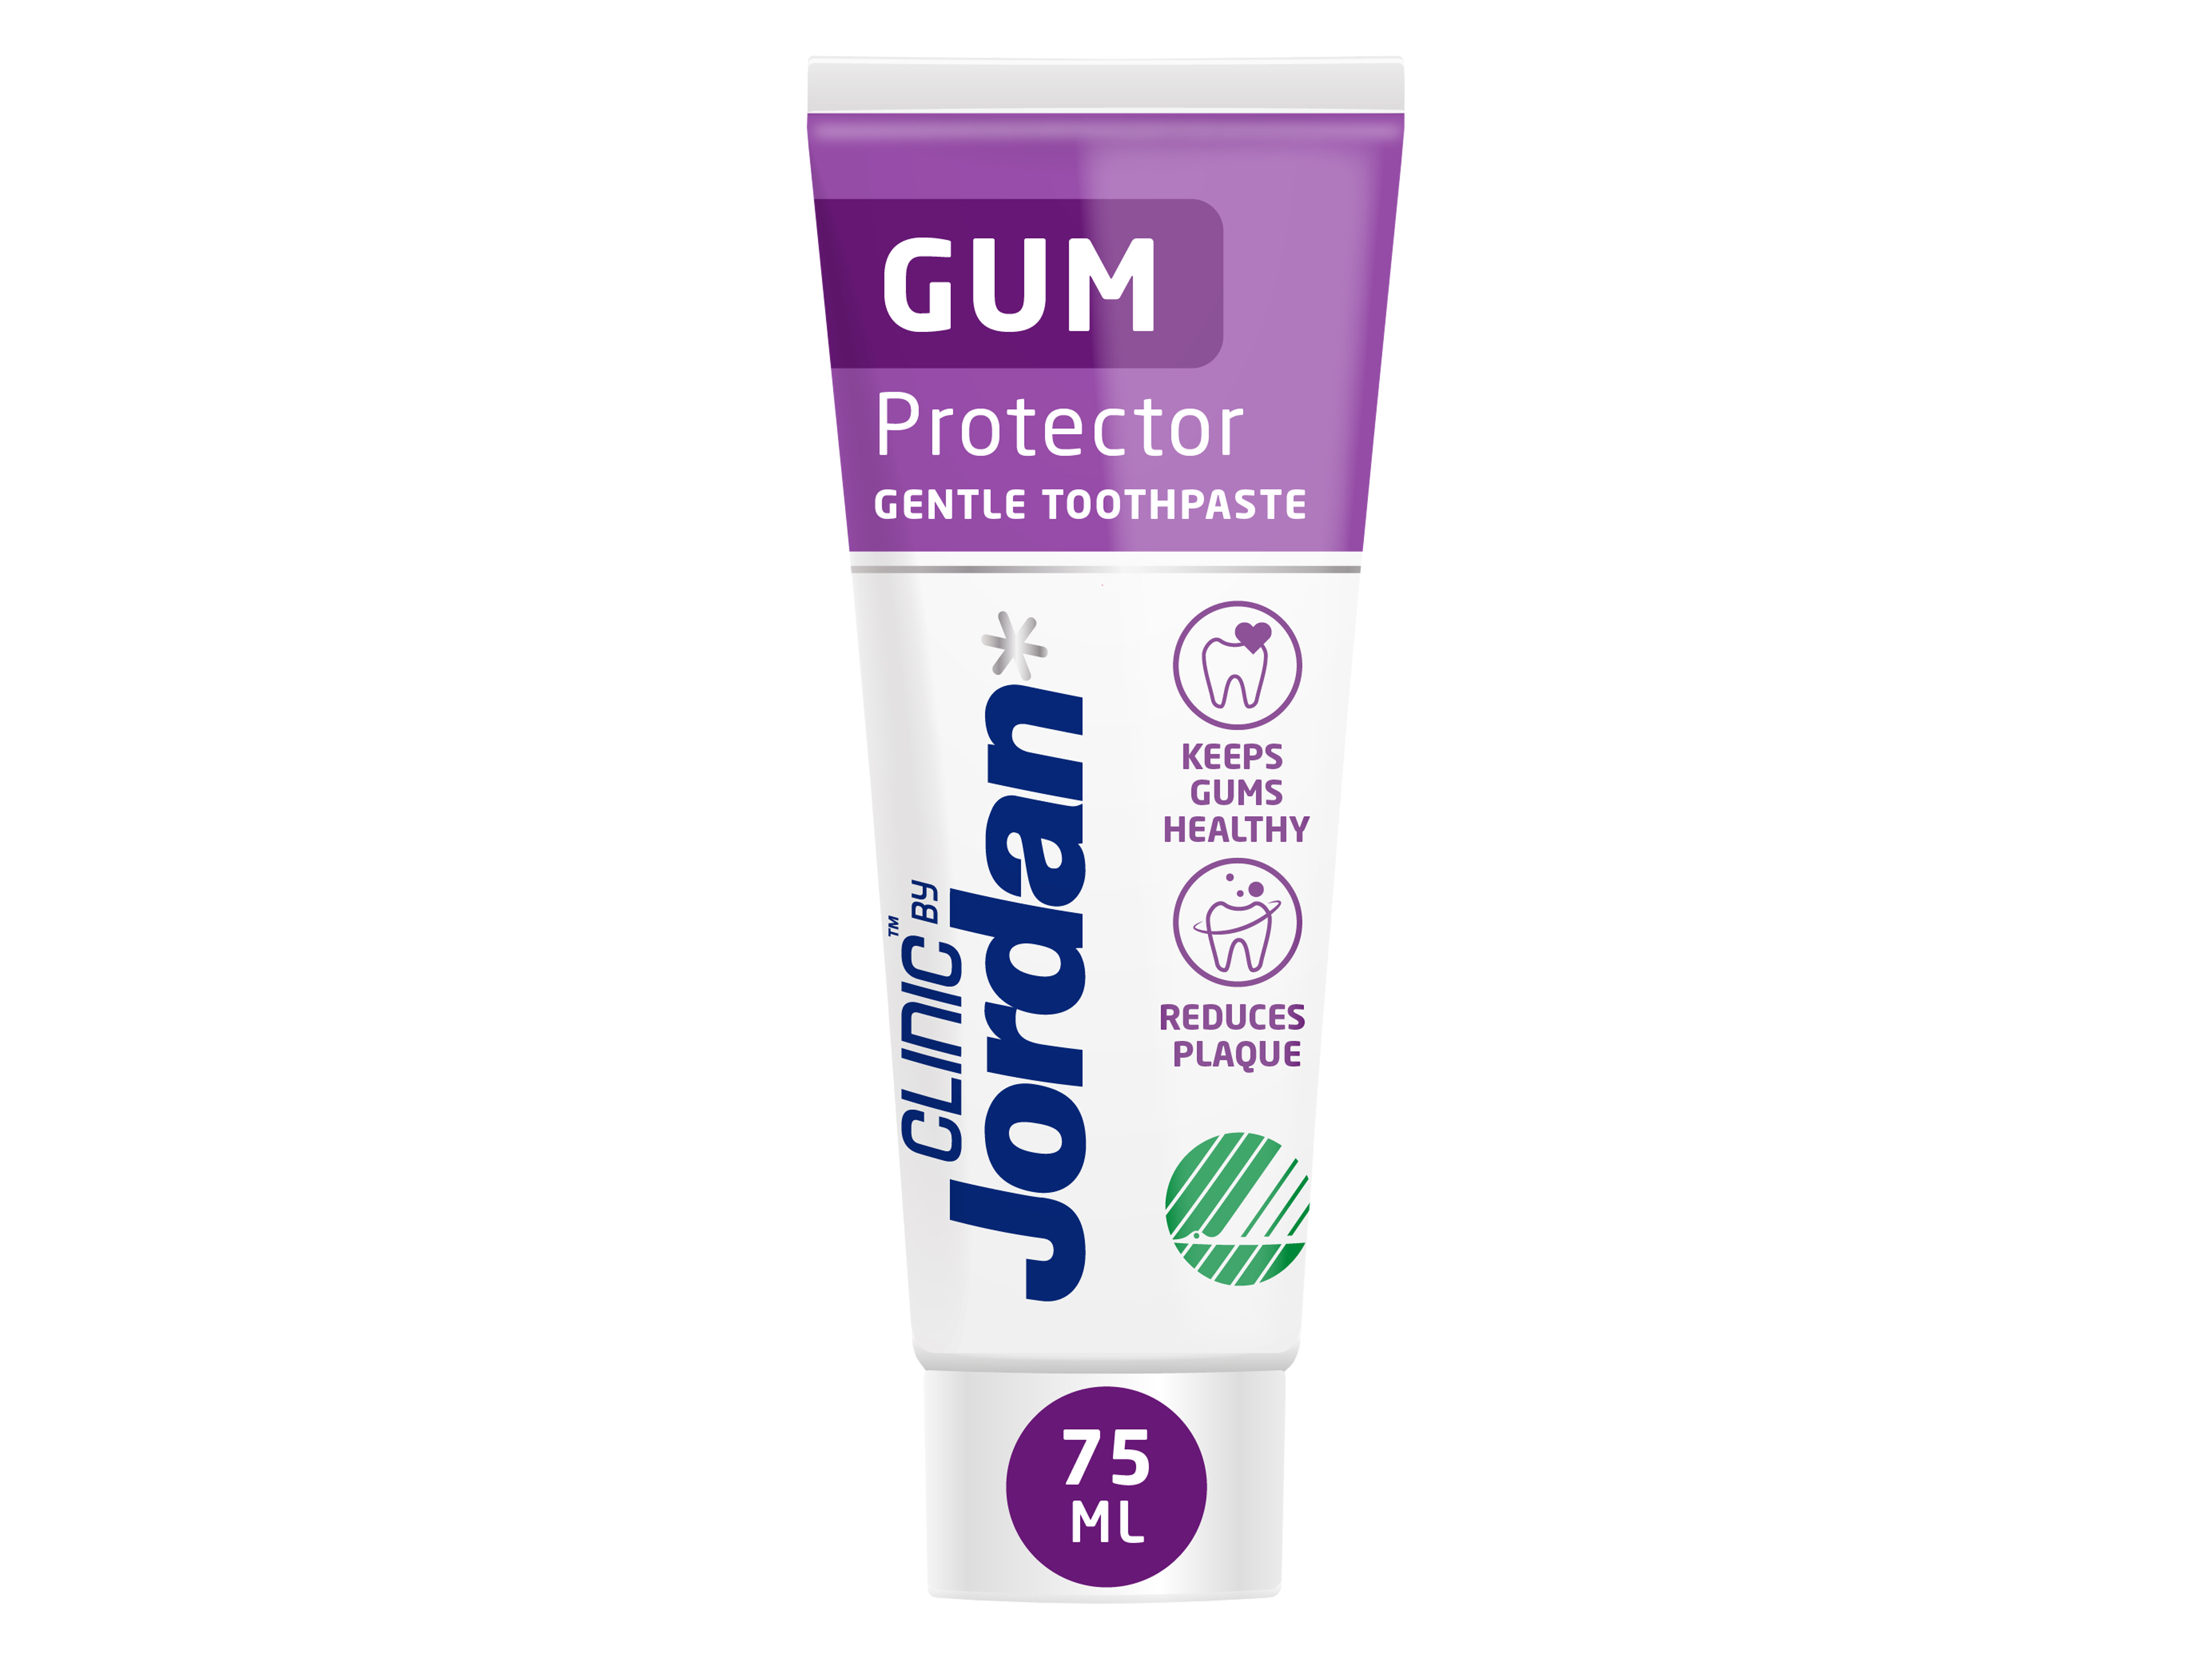 Clinic Gum Protector Gentle Toothpaste, 75 ml